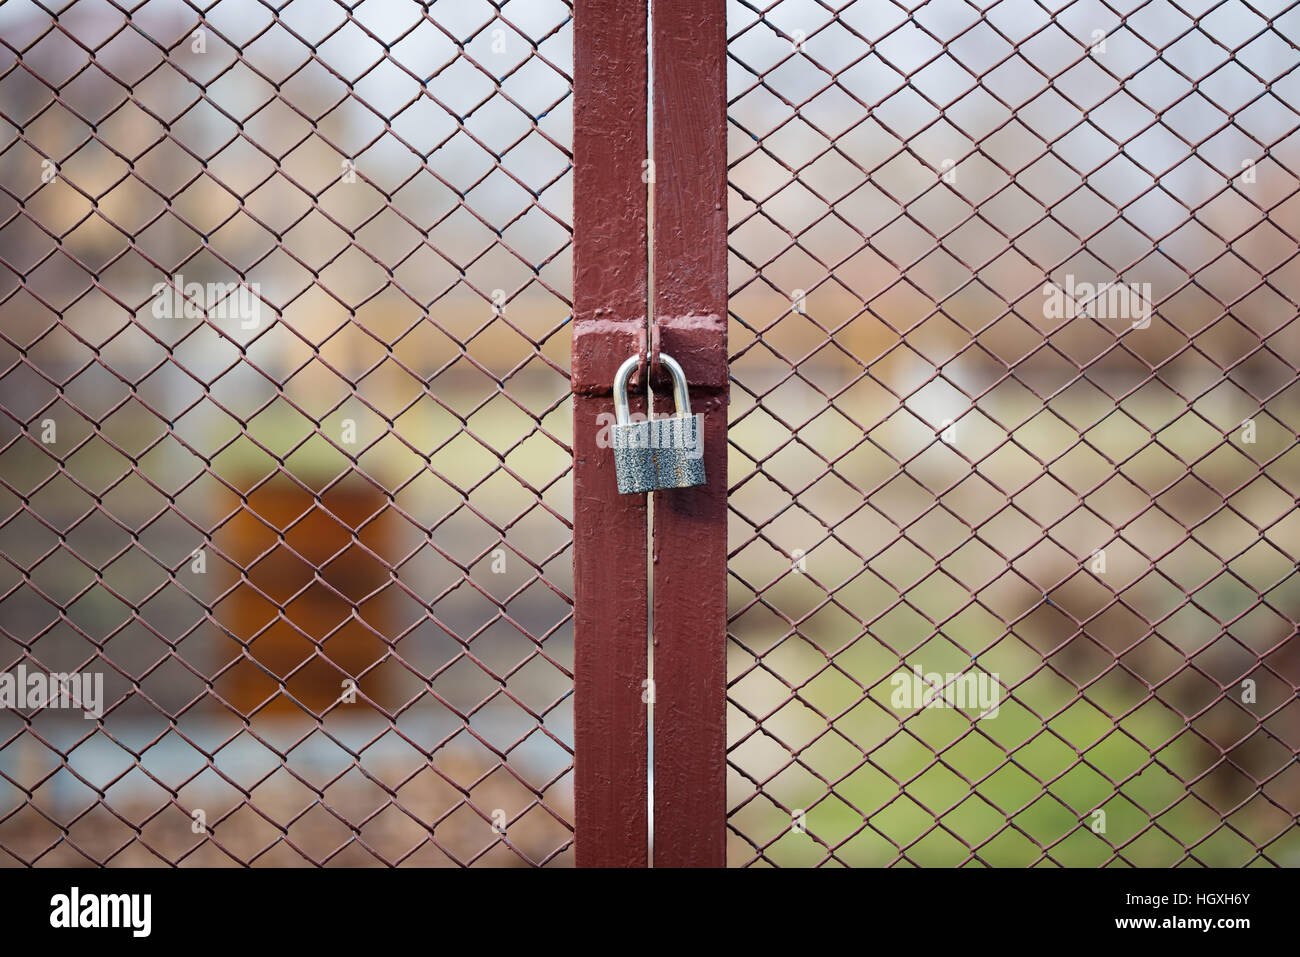 Locked wire mesh fence on private land Stock Photo